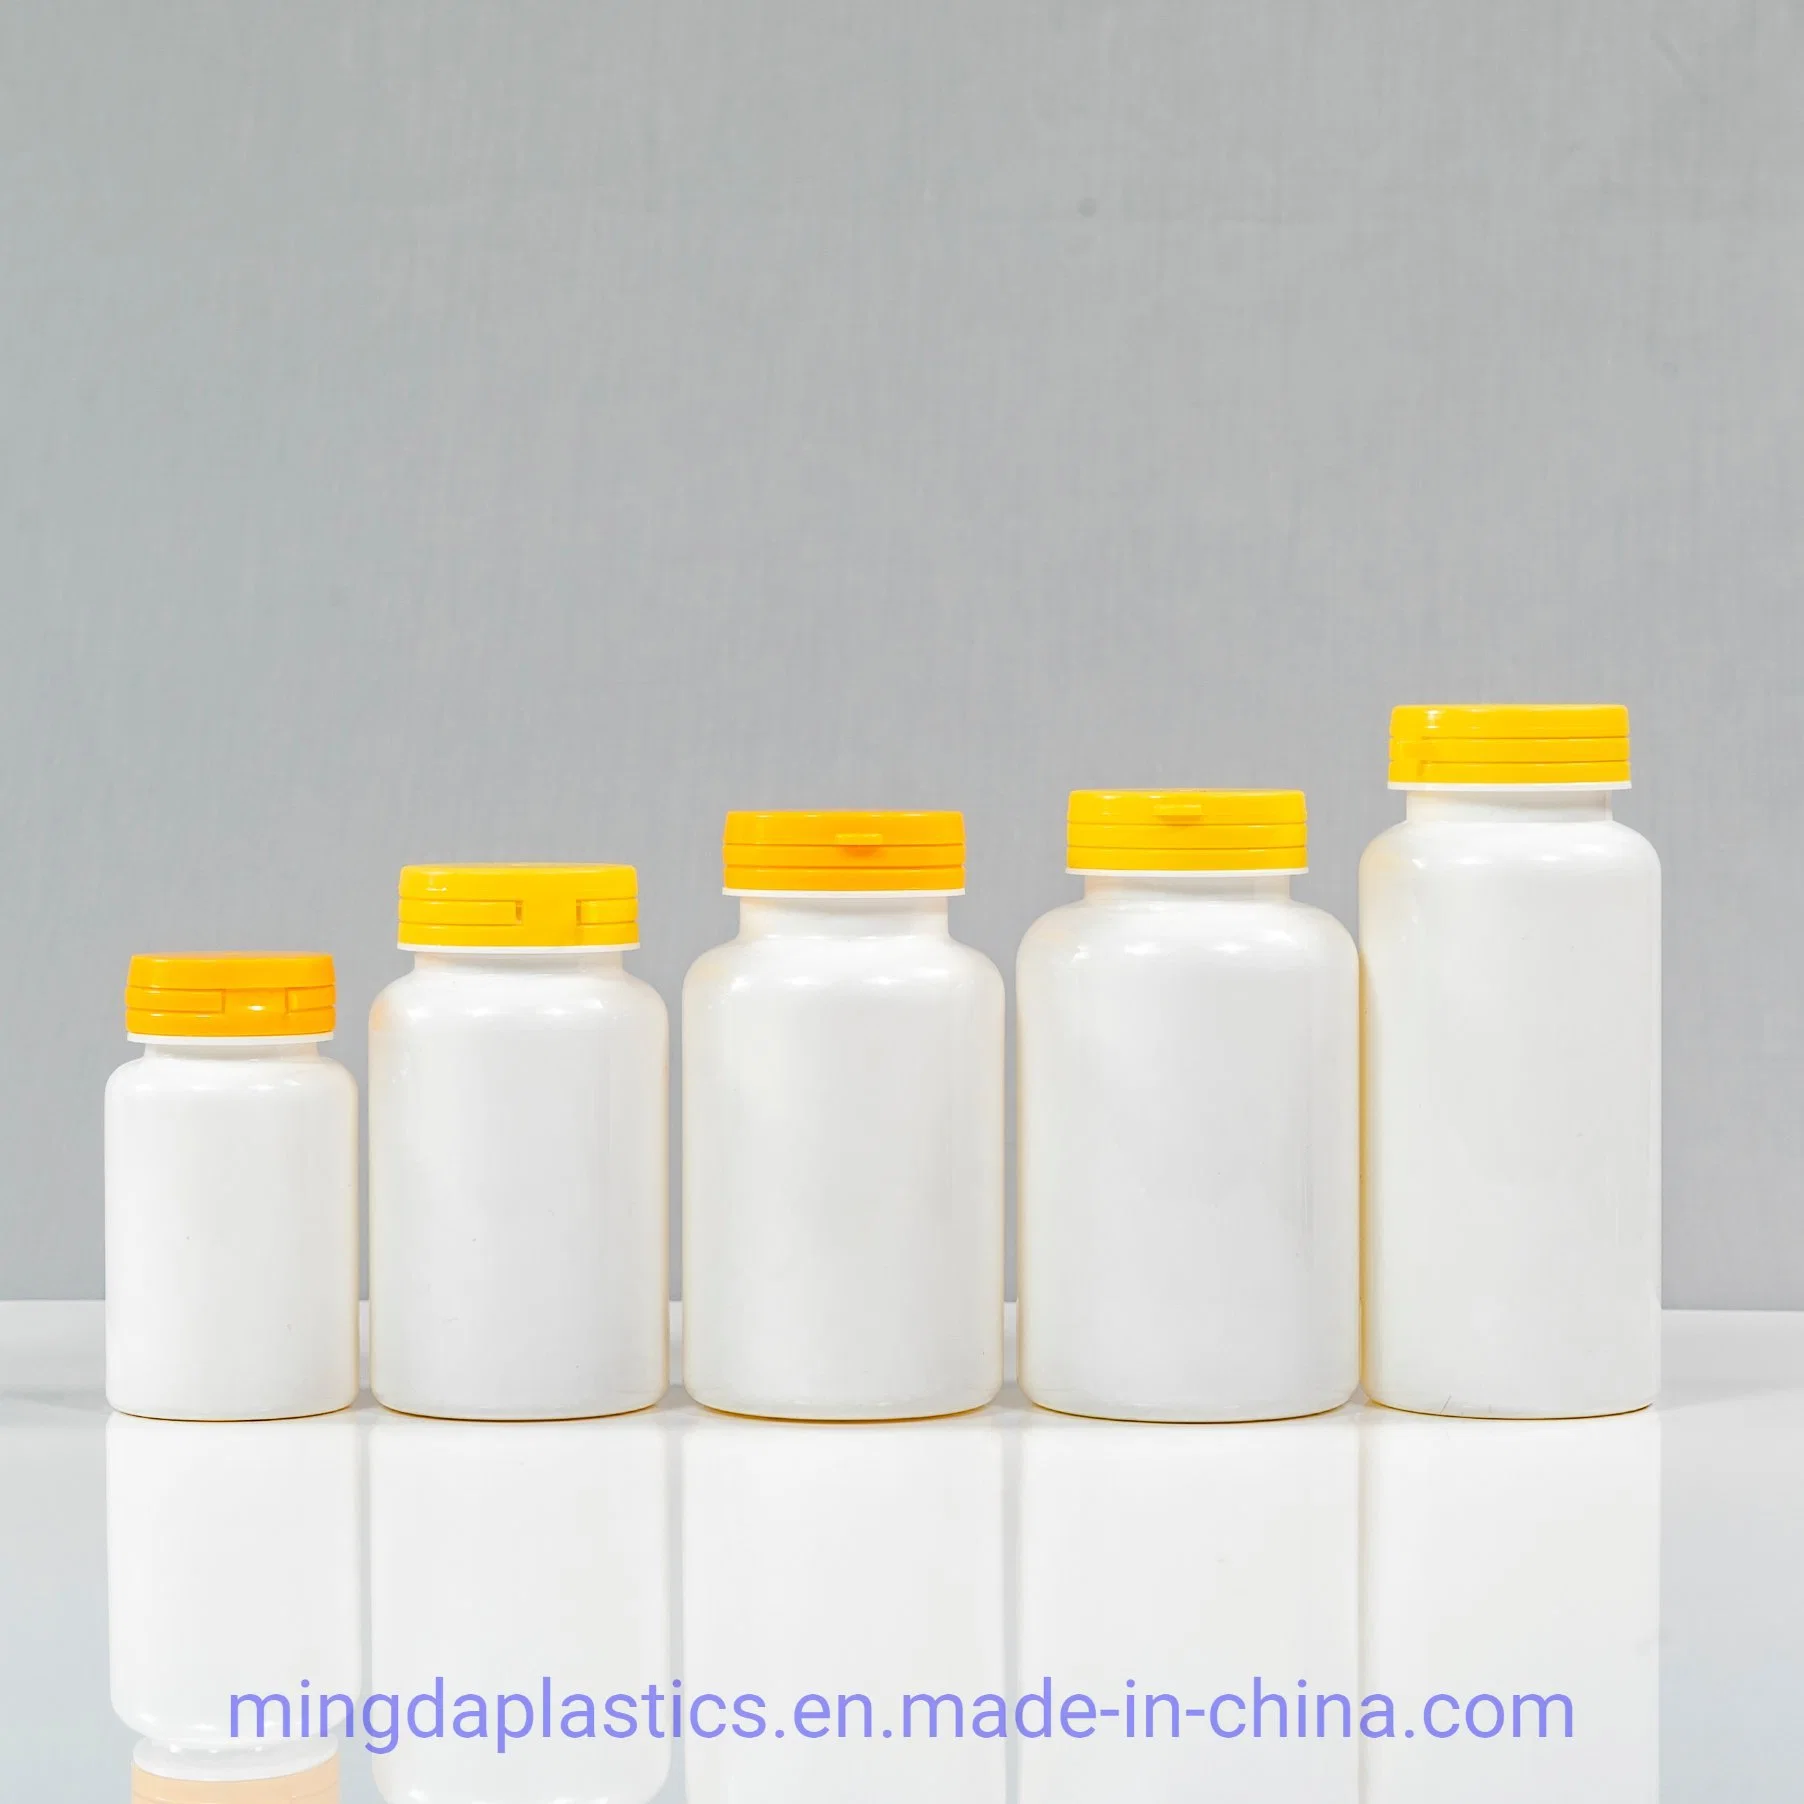 500ml Plastic Empty Packaging Pet Bottle with Tearing off Cap for Medical Products 16oz Manufacturer